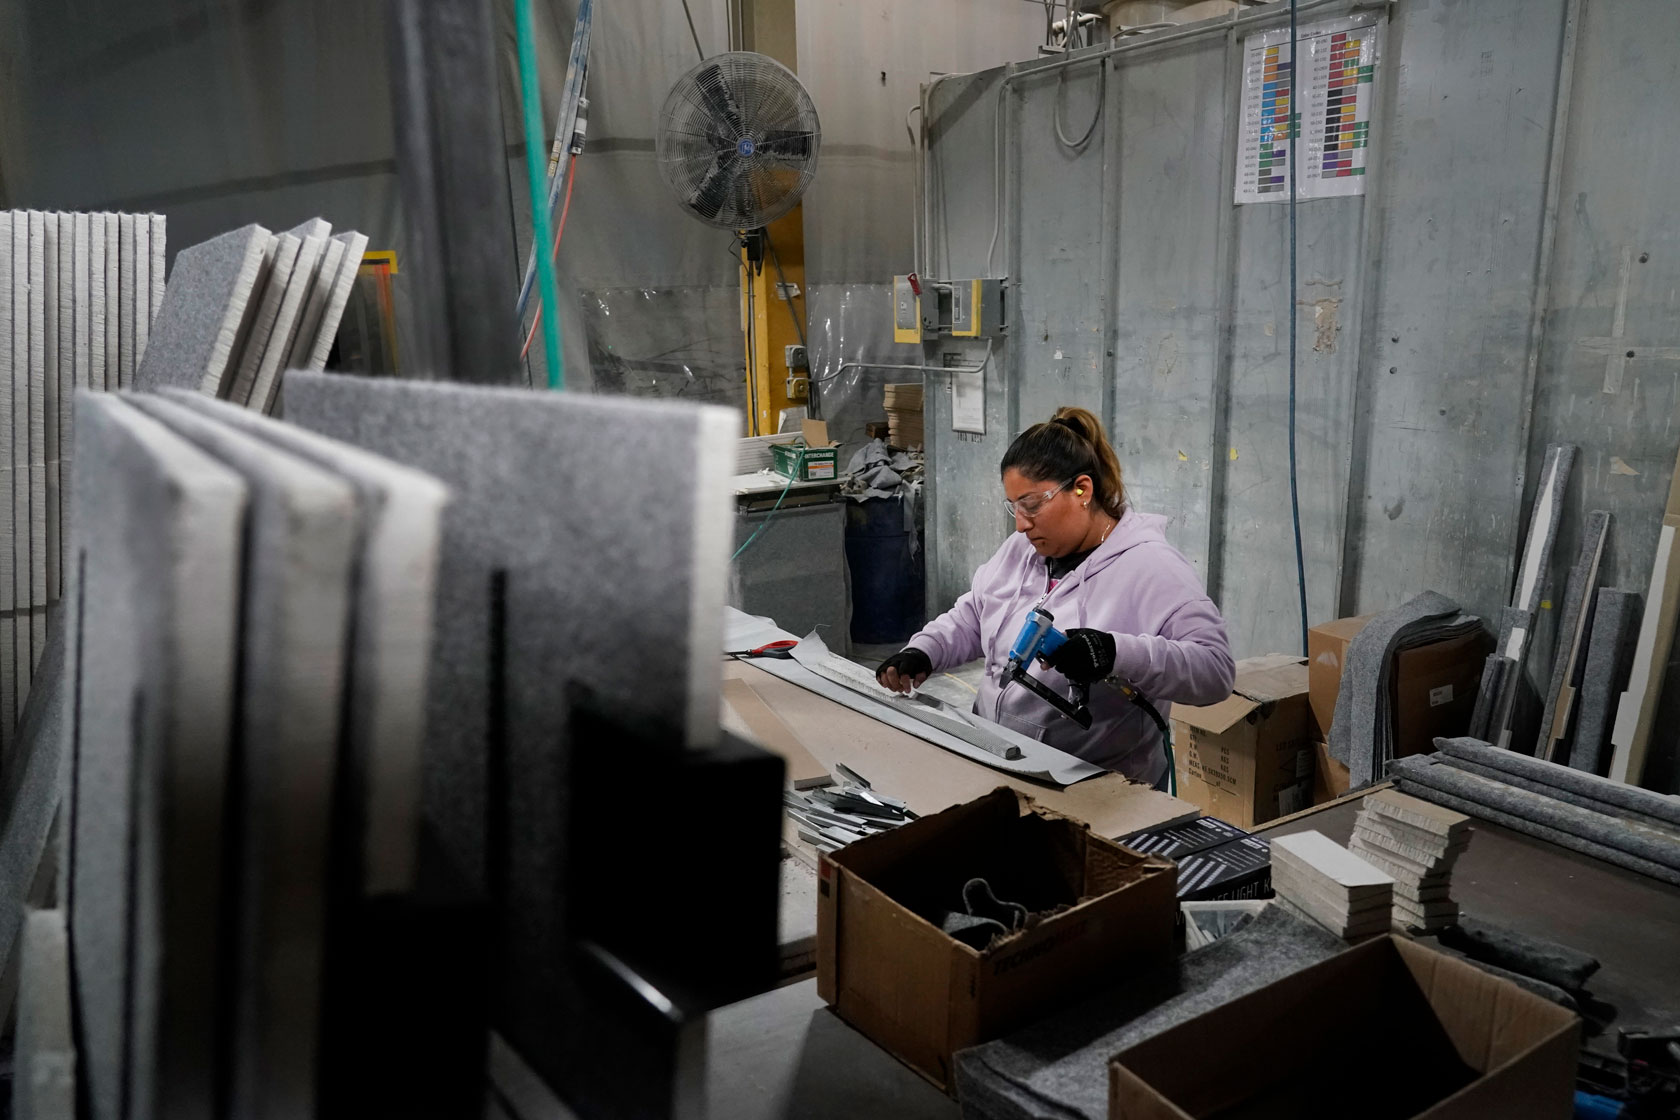 A worker assembles the interior of a safe that is being manufactured at a factory.